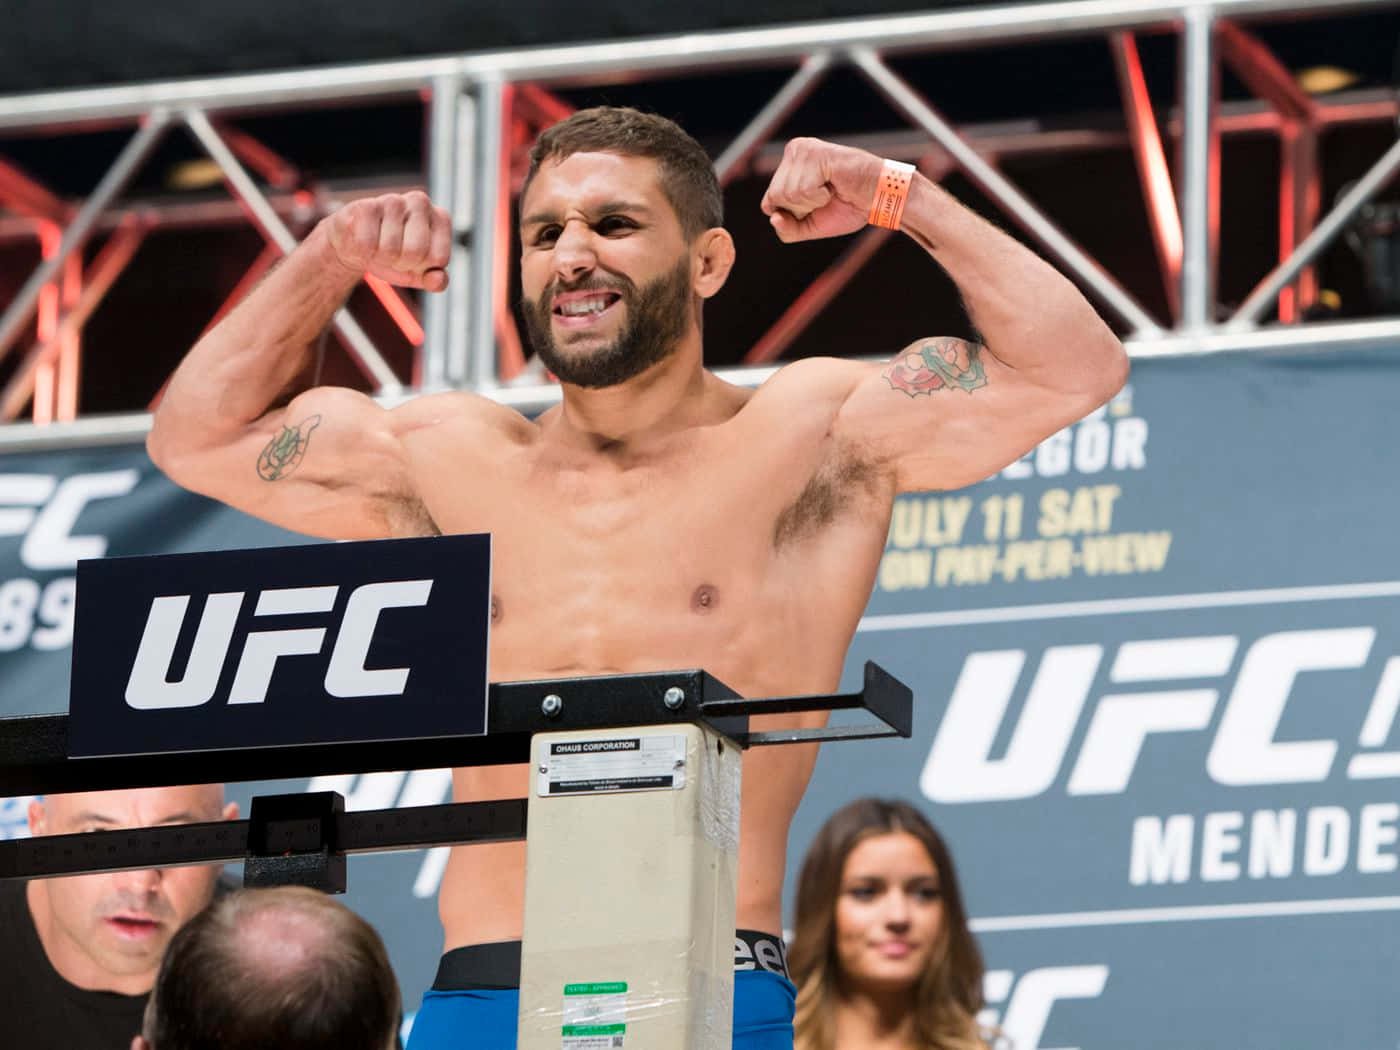 Chad Mendes Ufc Weigh-in Pre Fight Wallpaper